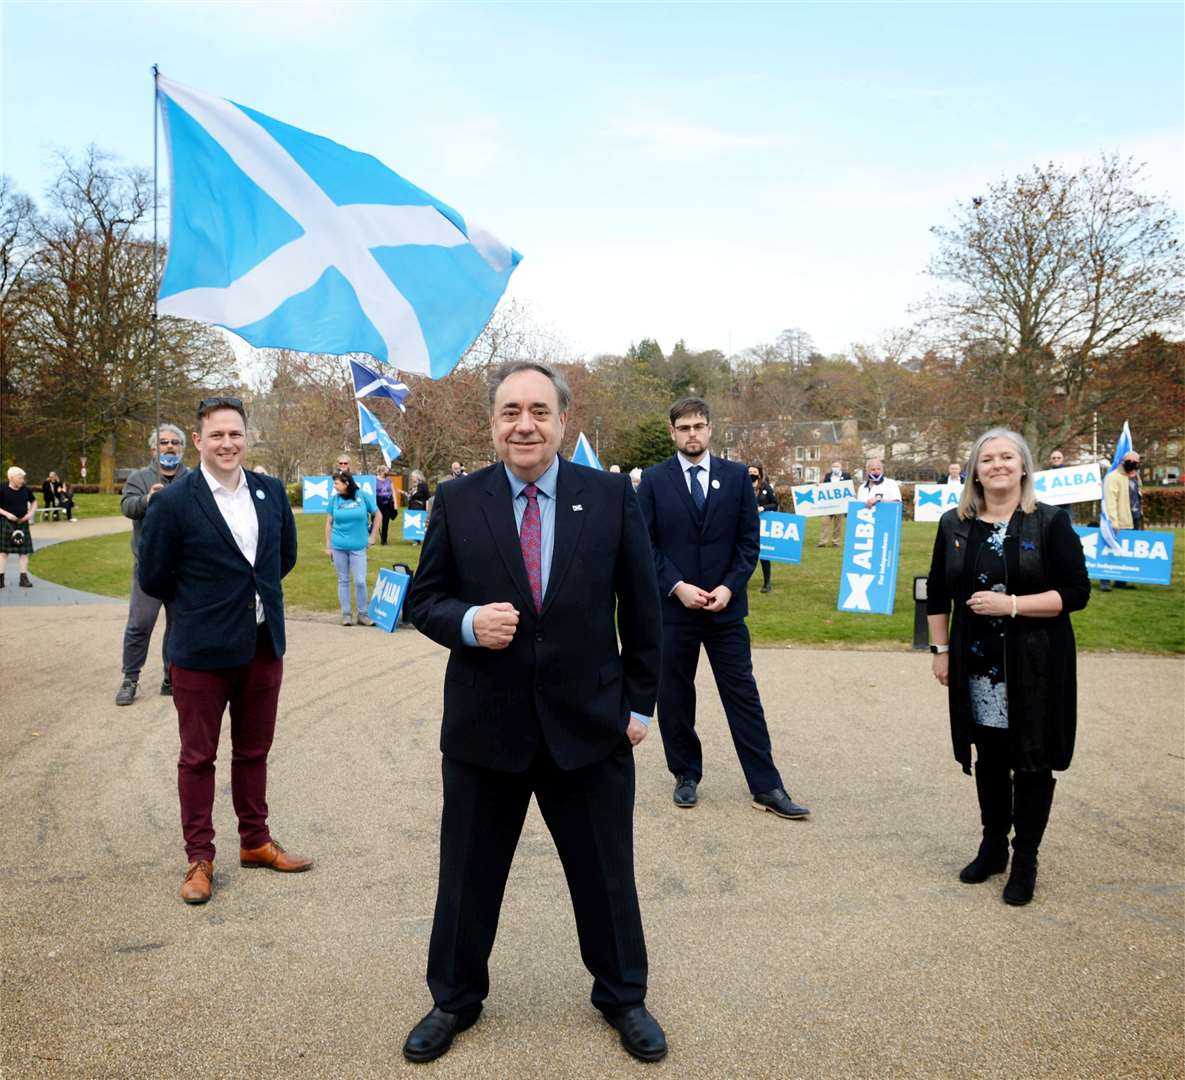 The launch Alba Highlands & Islands campaign also at Eden Court in 2021 with Kirk Torrance (left), Alex Salmond (centre), Josh Robertson and Judith Reid (right). Picture: James Mackenzie.